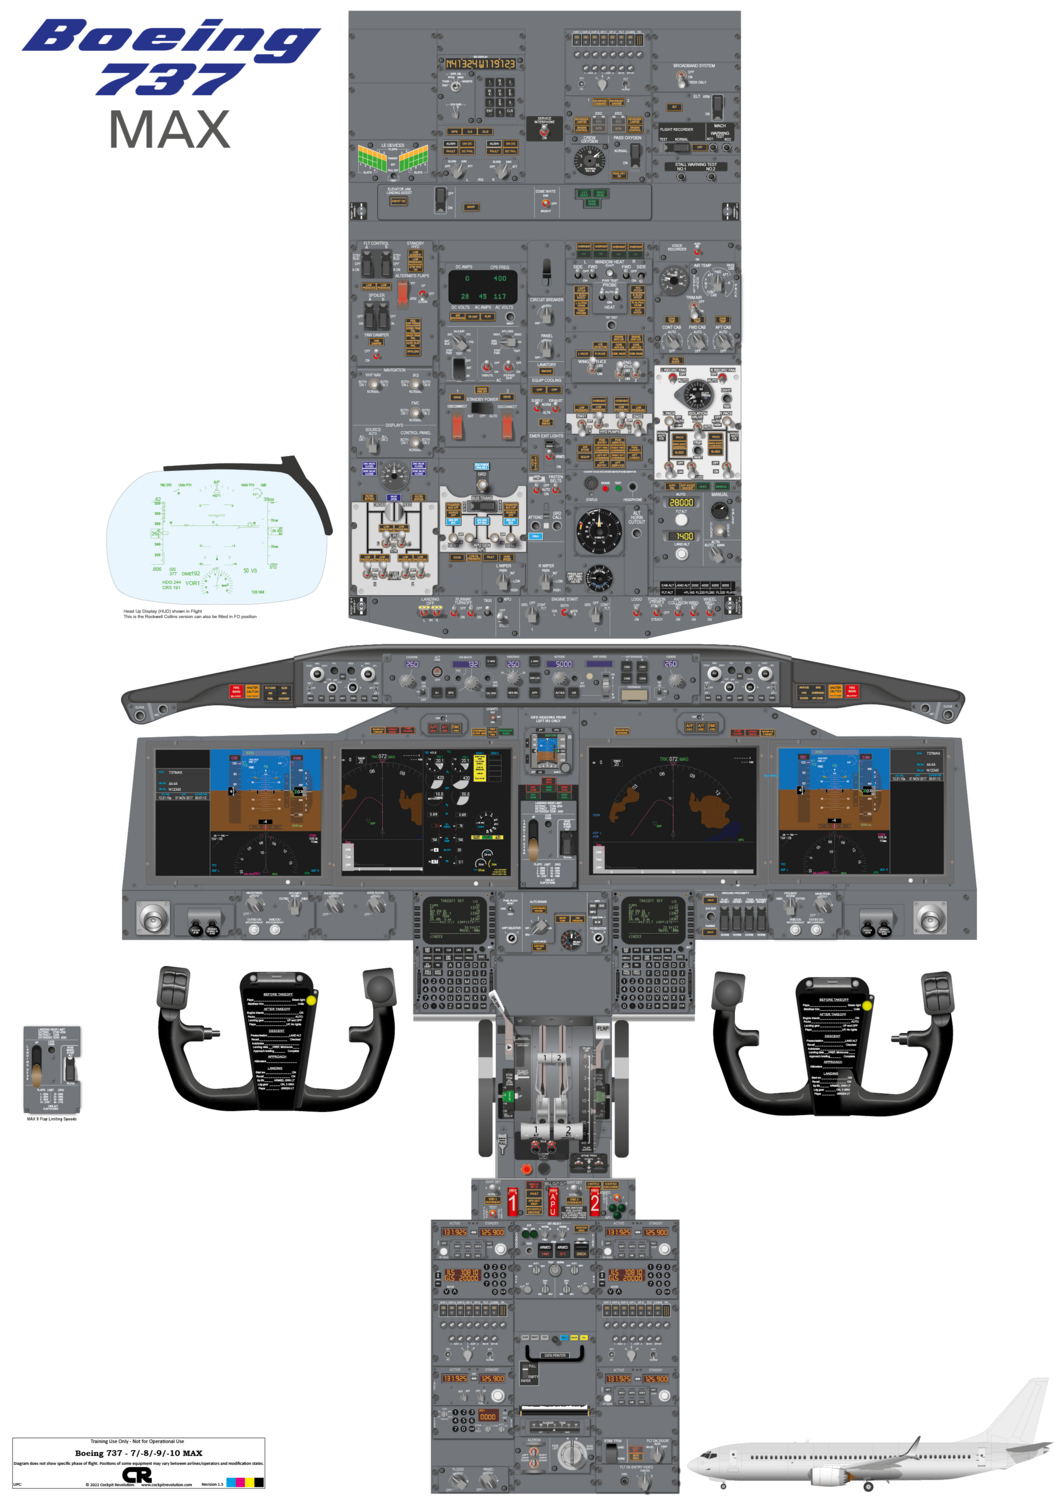 Boeing 737-7/8/9/10 MAX Cockpit Poster - Printed